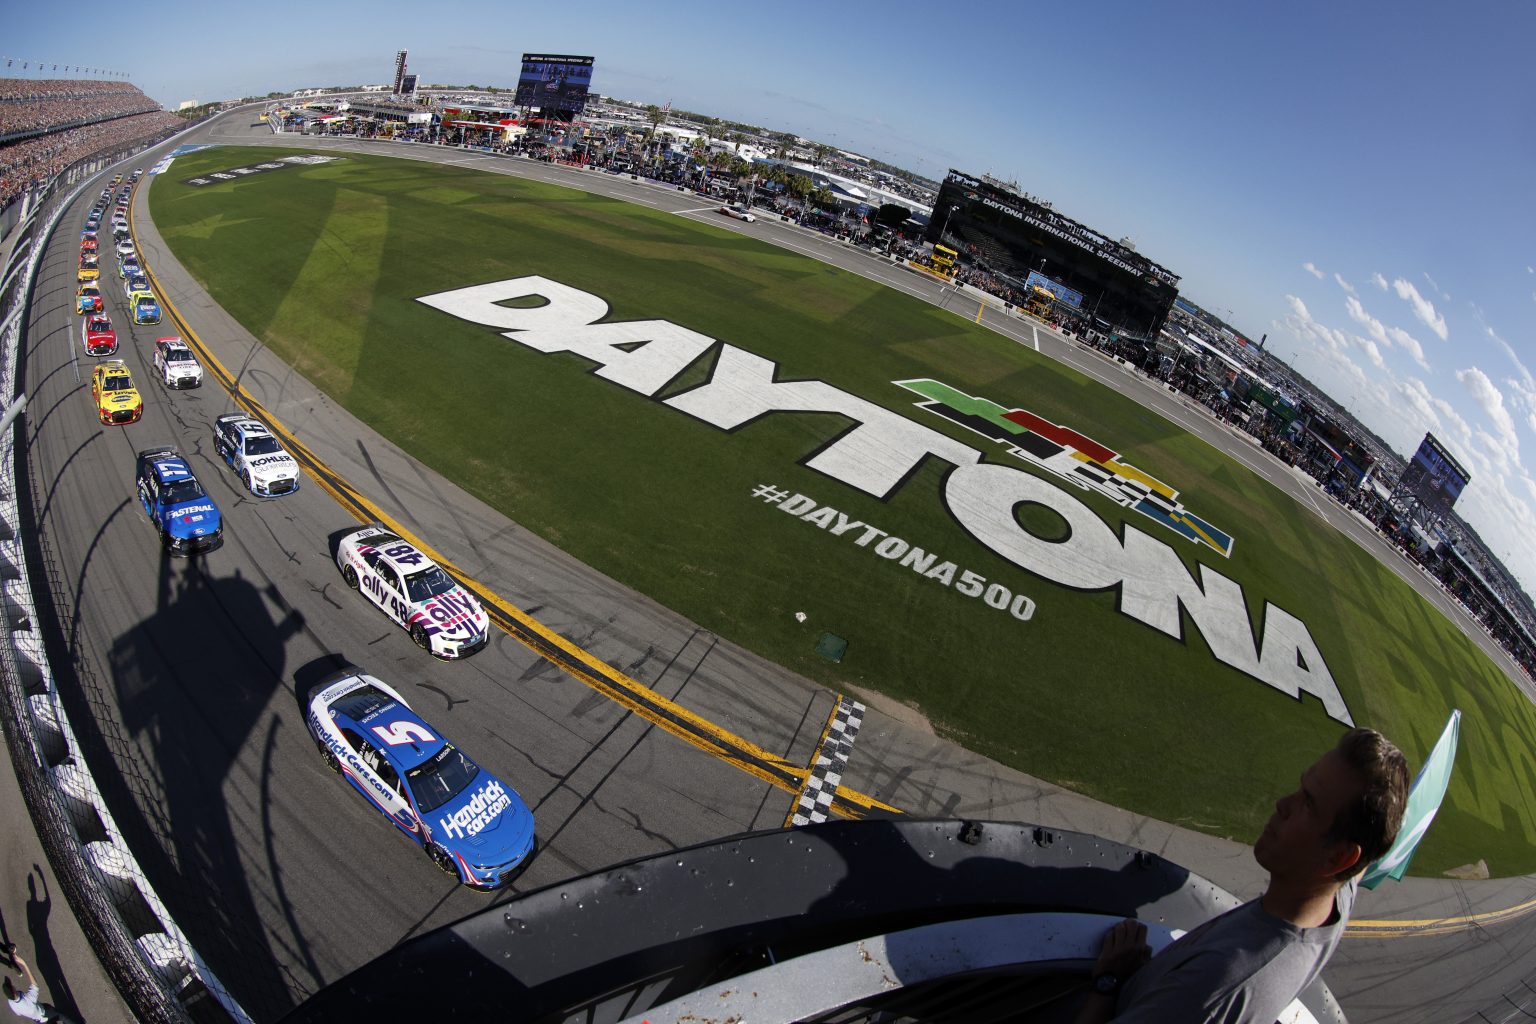 NASCAR Daytona 500 Preview, Predictions, & How to Watch